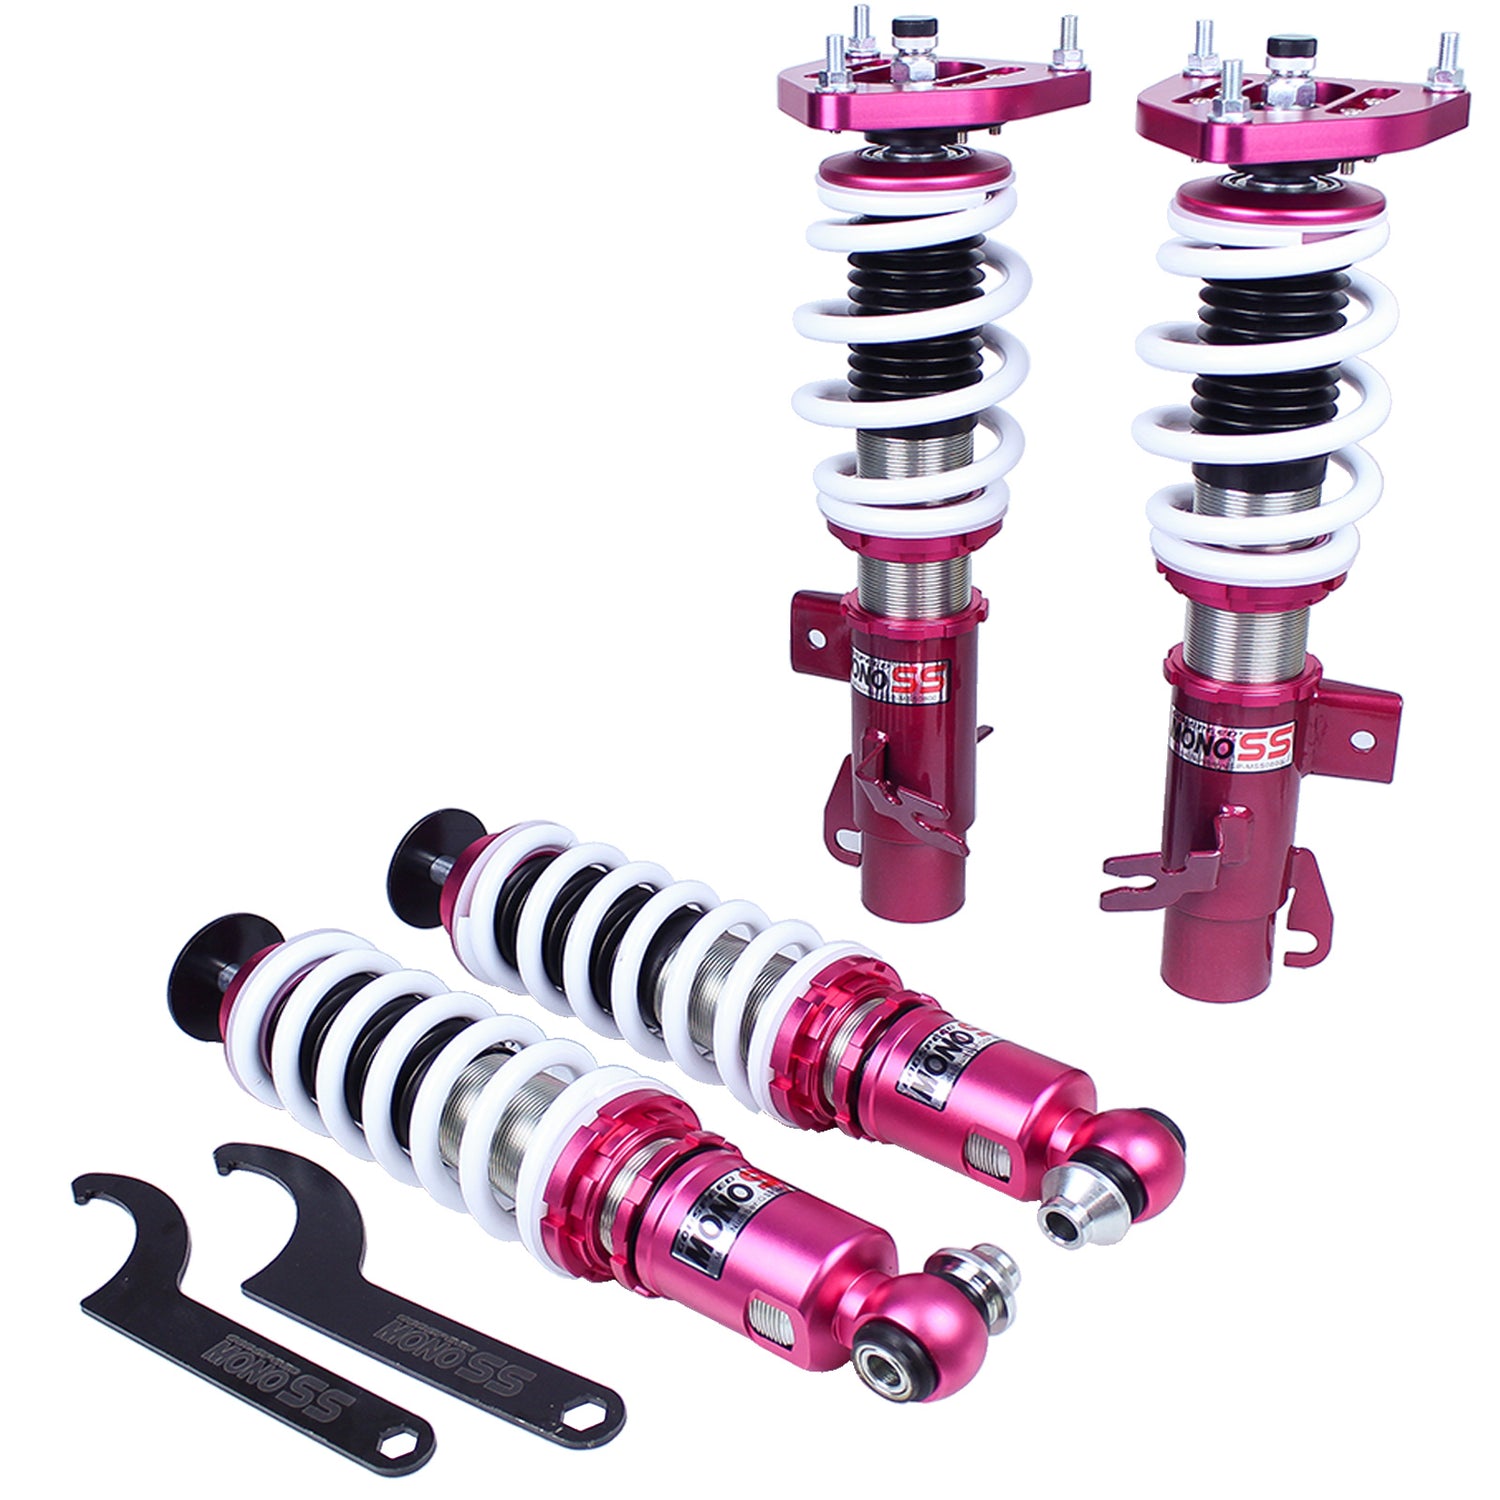 Godspeed MSS0800 MonoSS Coilover Lowering Kit, Fully Adjustable, Ride Height, Spring Tension And 16 Click Damping, MINI Clubman(R55) 2007-14